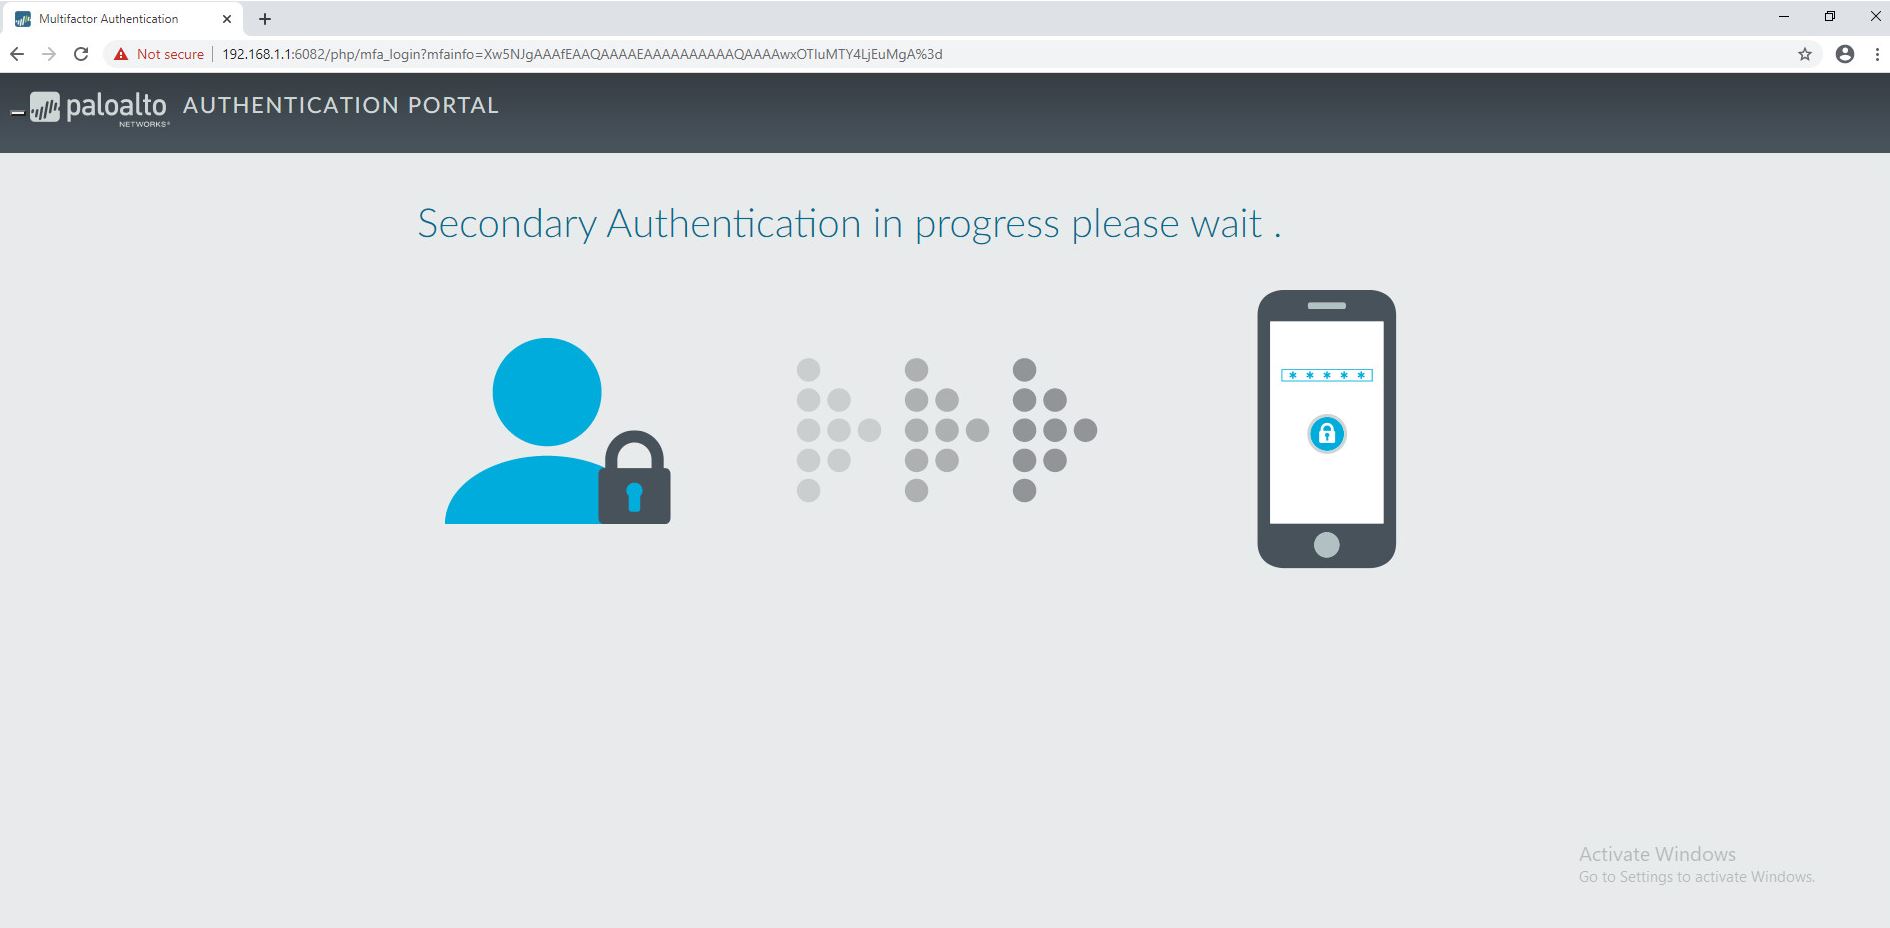 this image shows second authentication during login